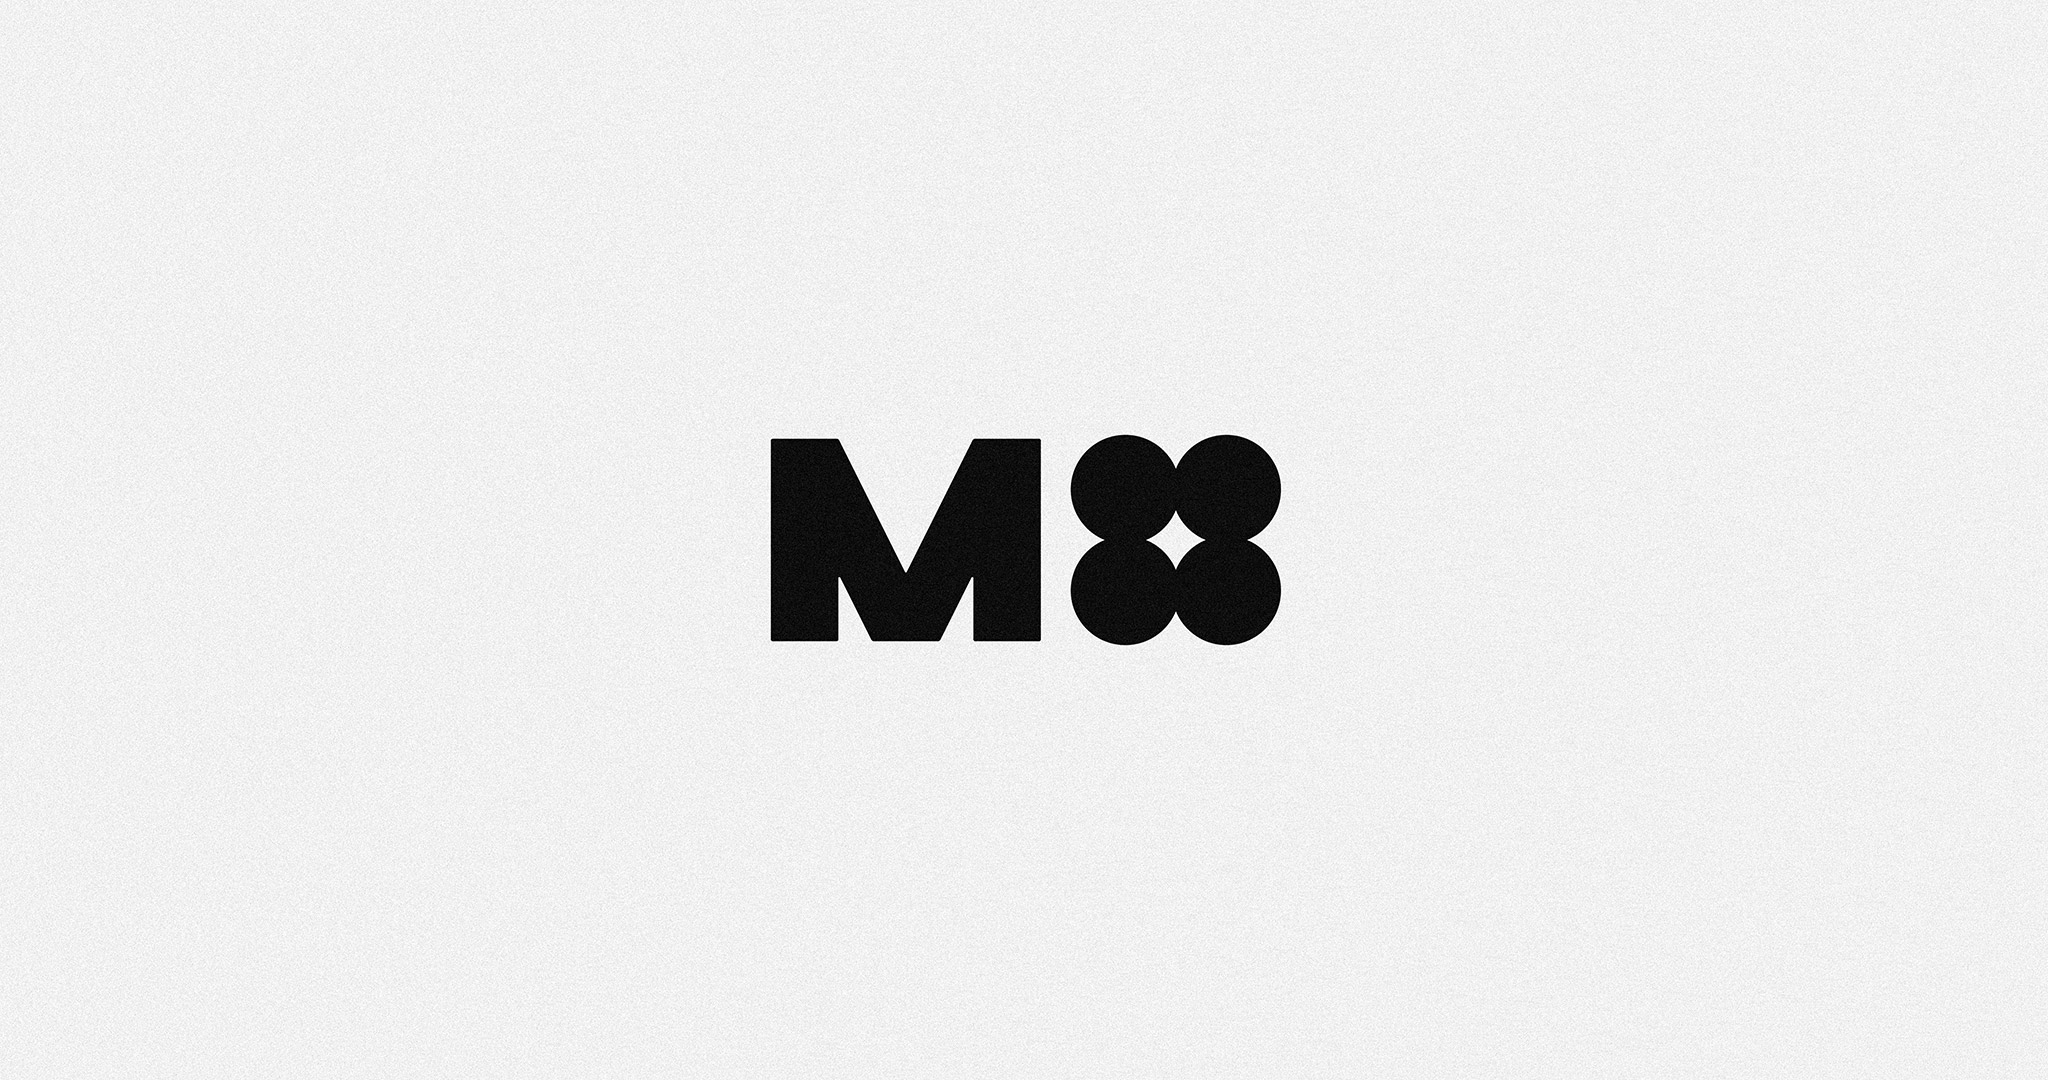 The M4 Music logotype. It features a bold, industrial, uppercase ‘M’, and 4 circles grouped together to represent the number ‘four’. Black logotype over white background.